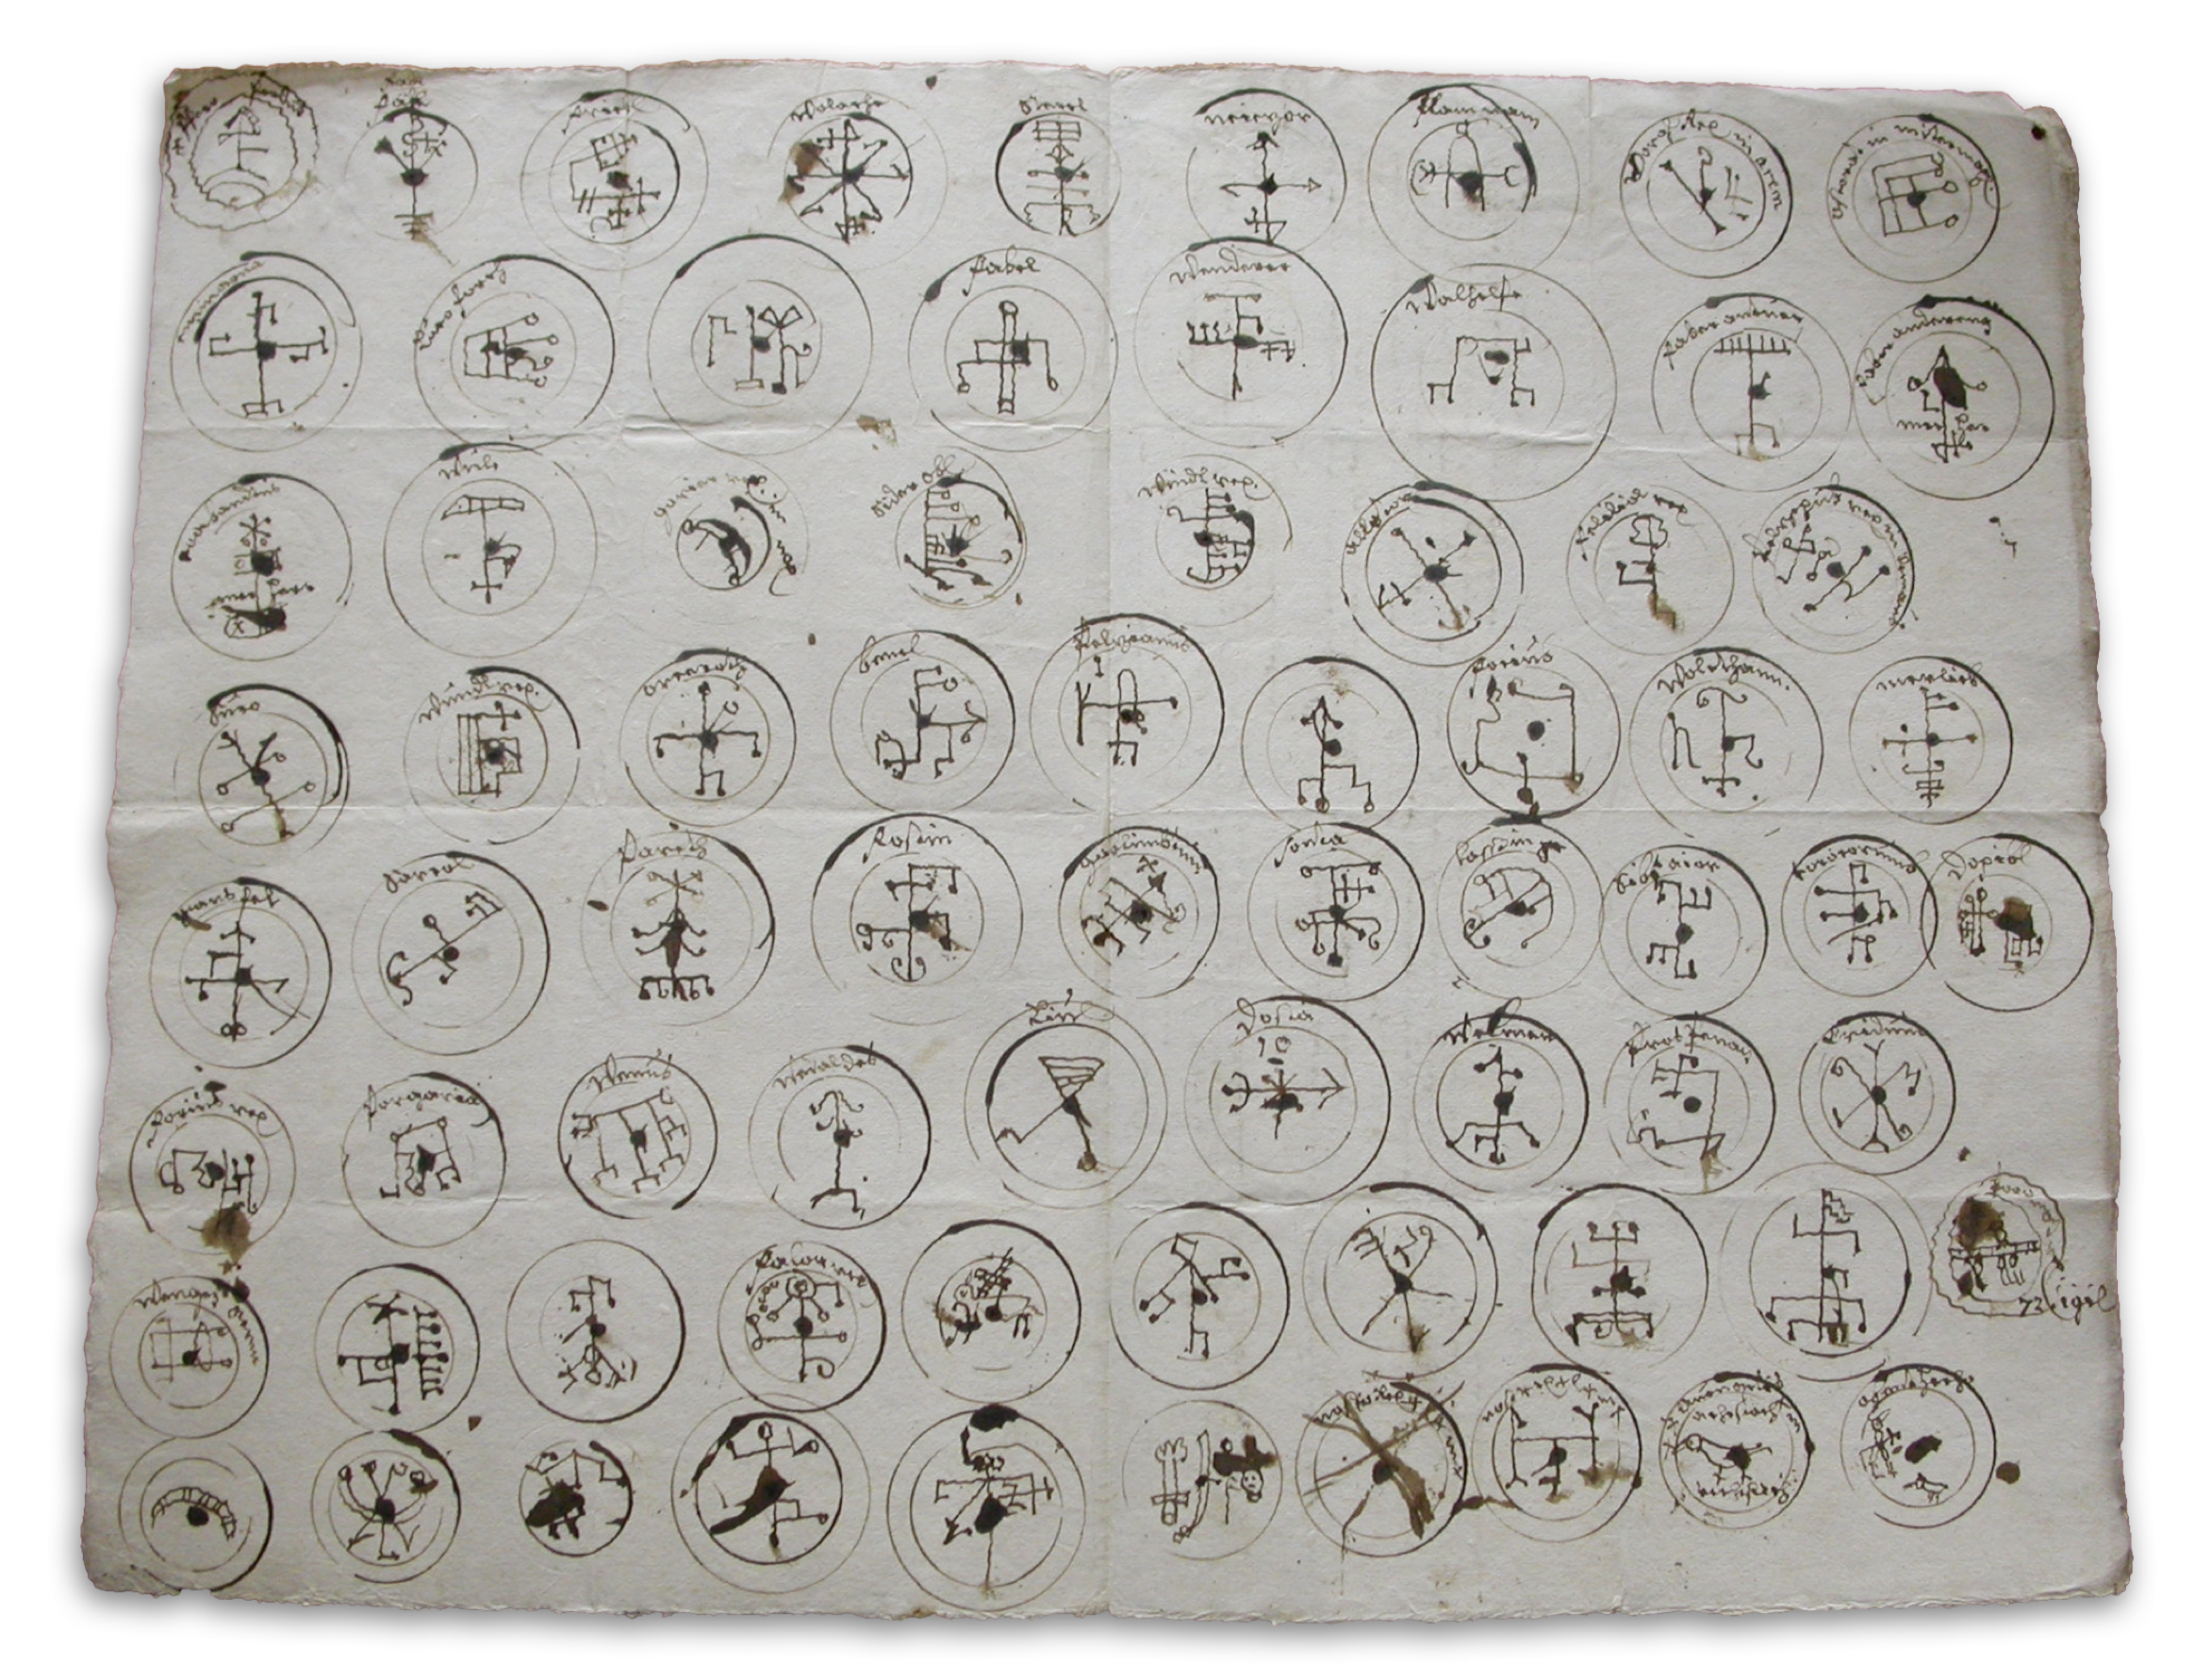 72 Devil's Seals from the trial records of Ludwig Perkhofer, 1683